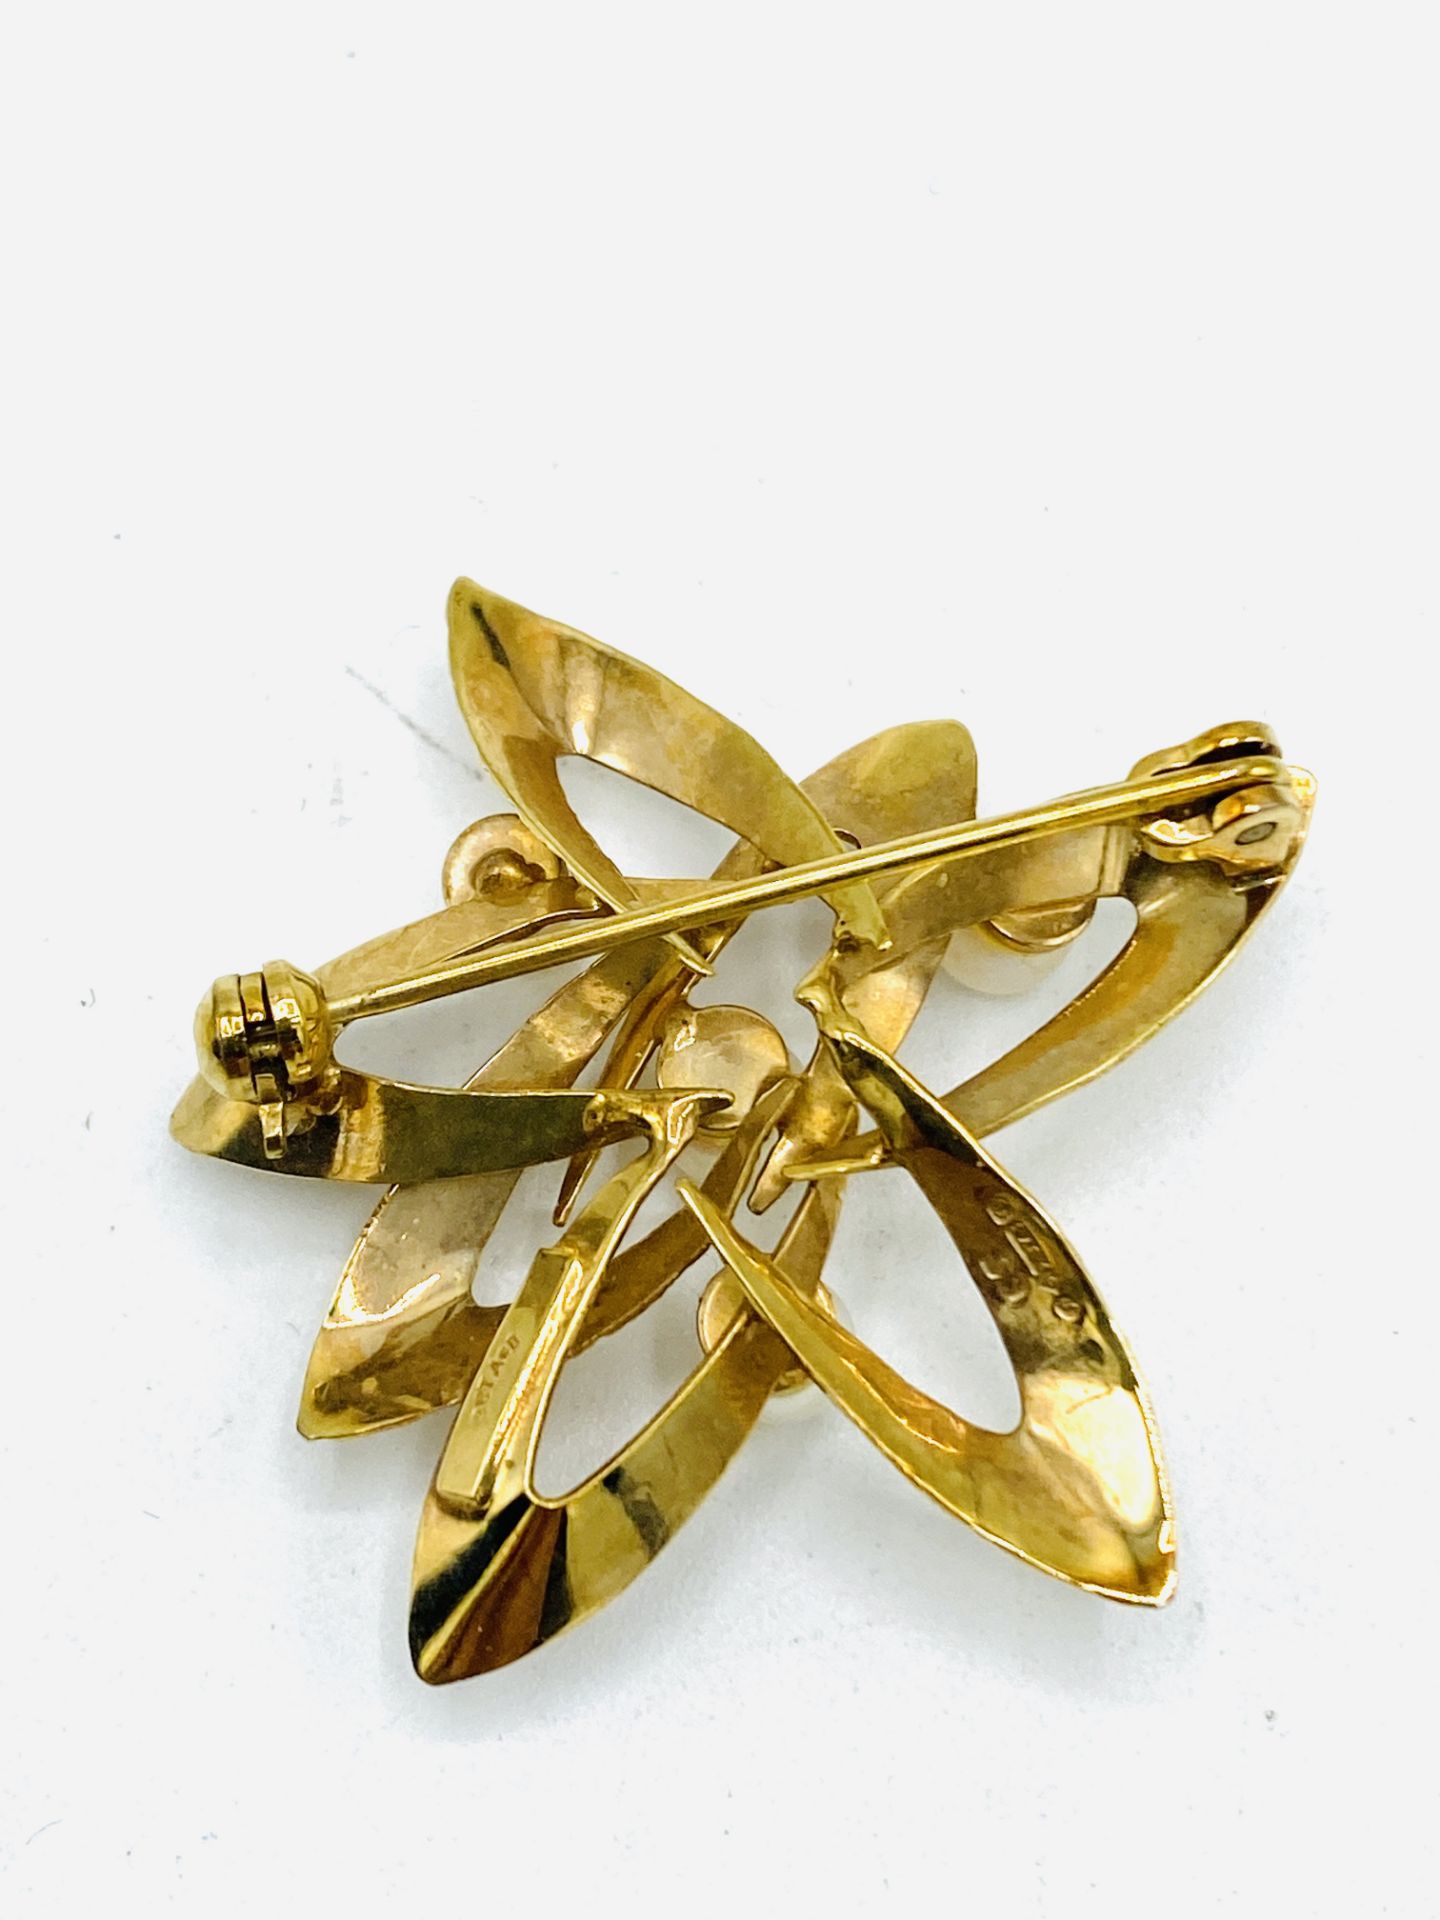 9ct gold brooch set with pearls - Image 5 of 5